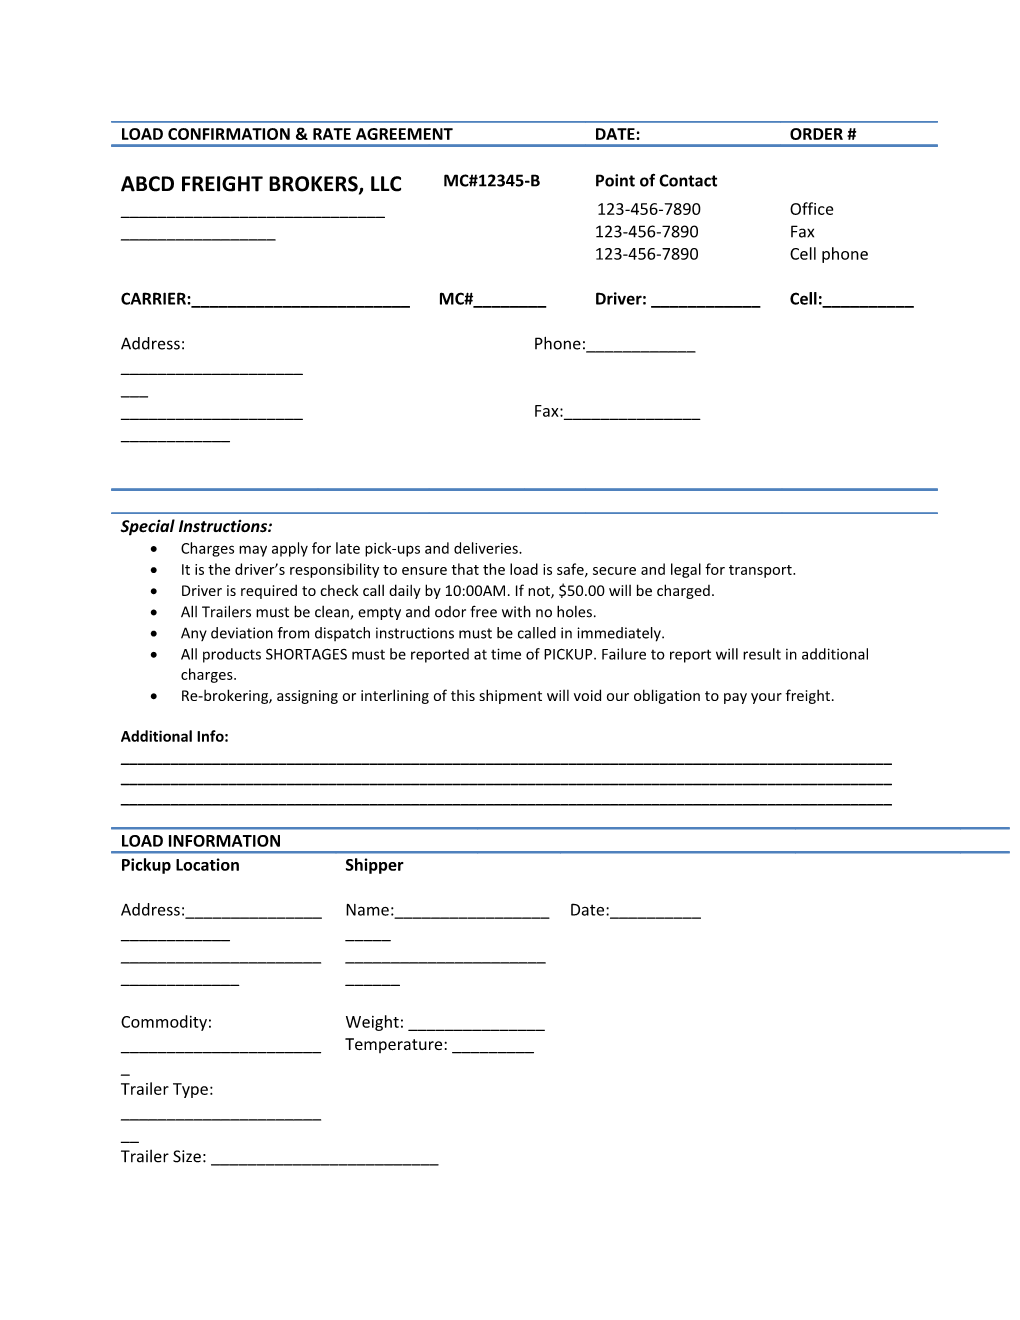 Load Confirmation & Rate Agreement